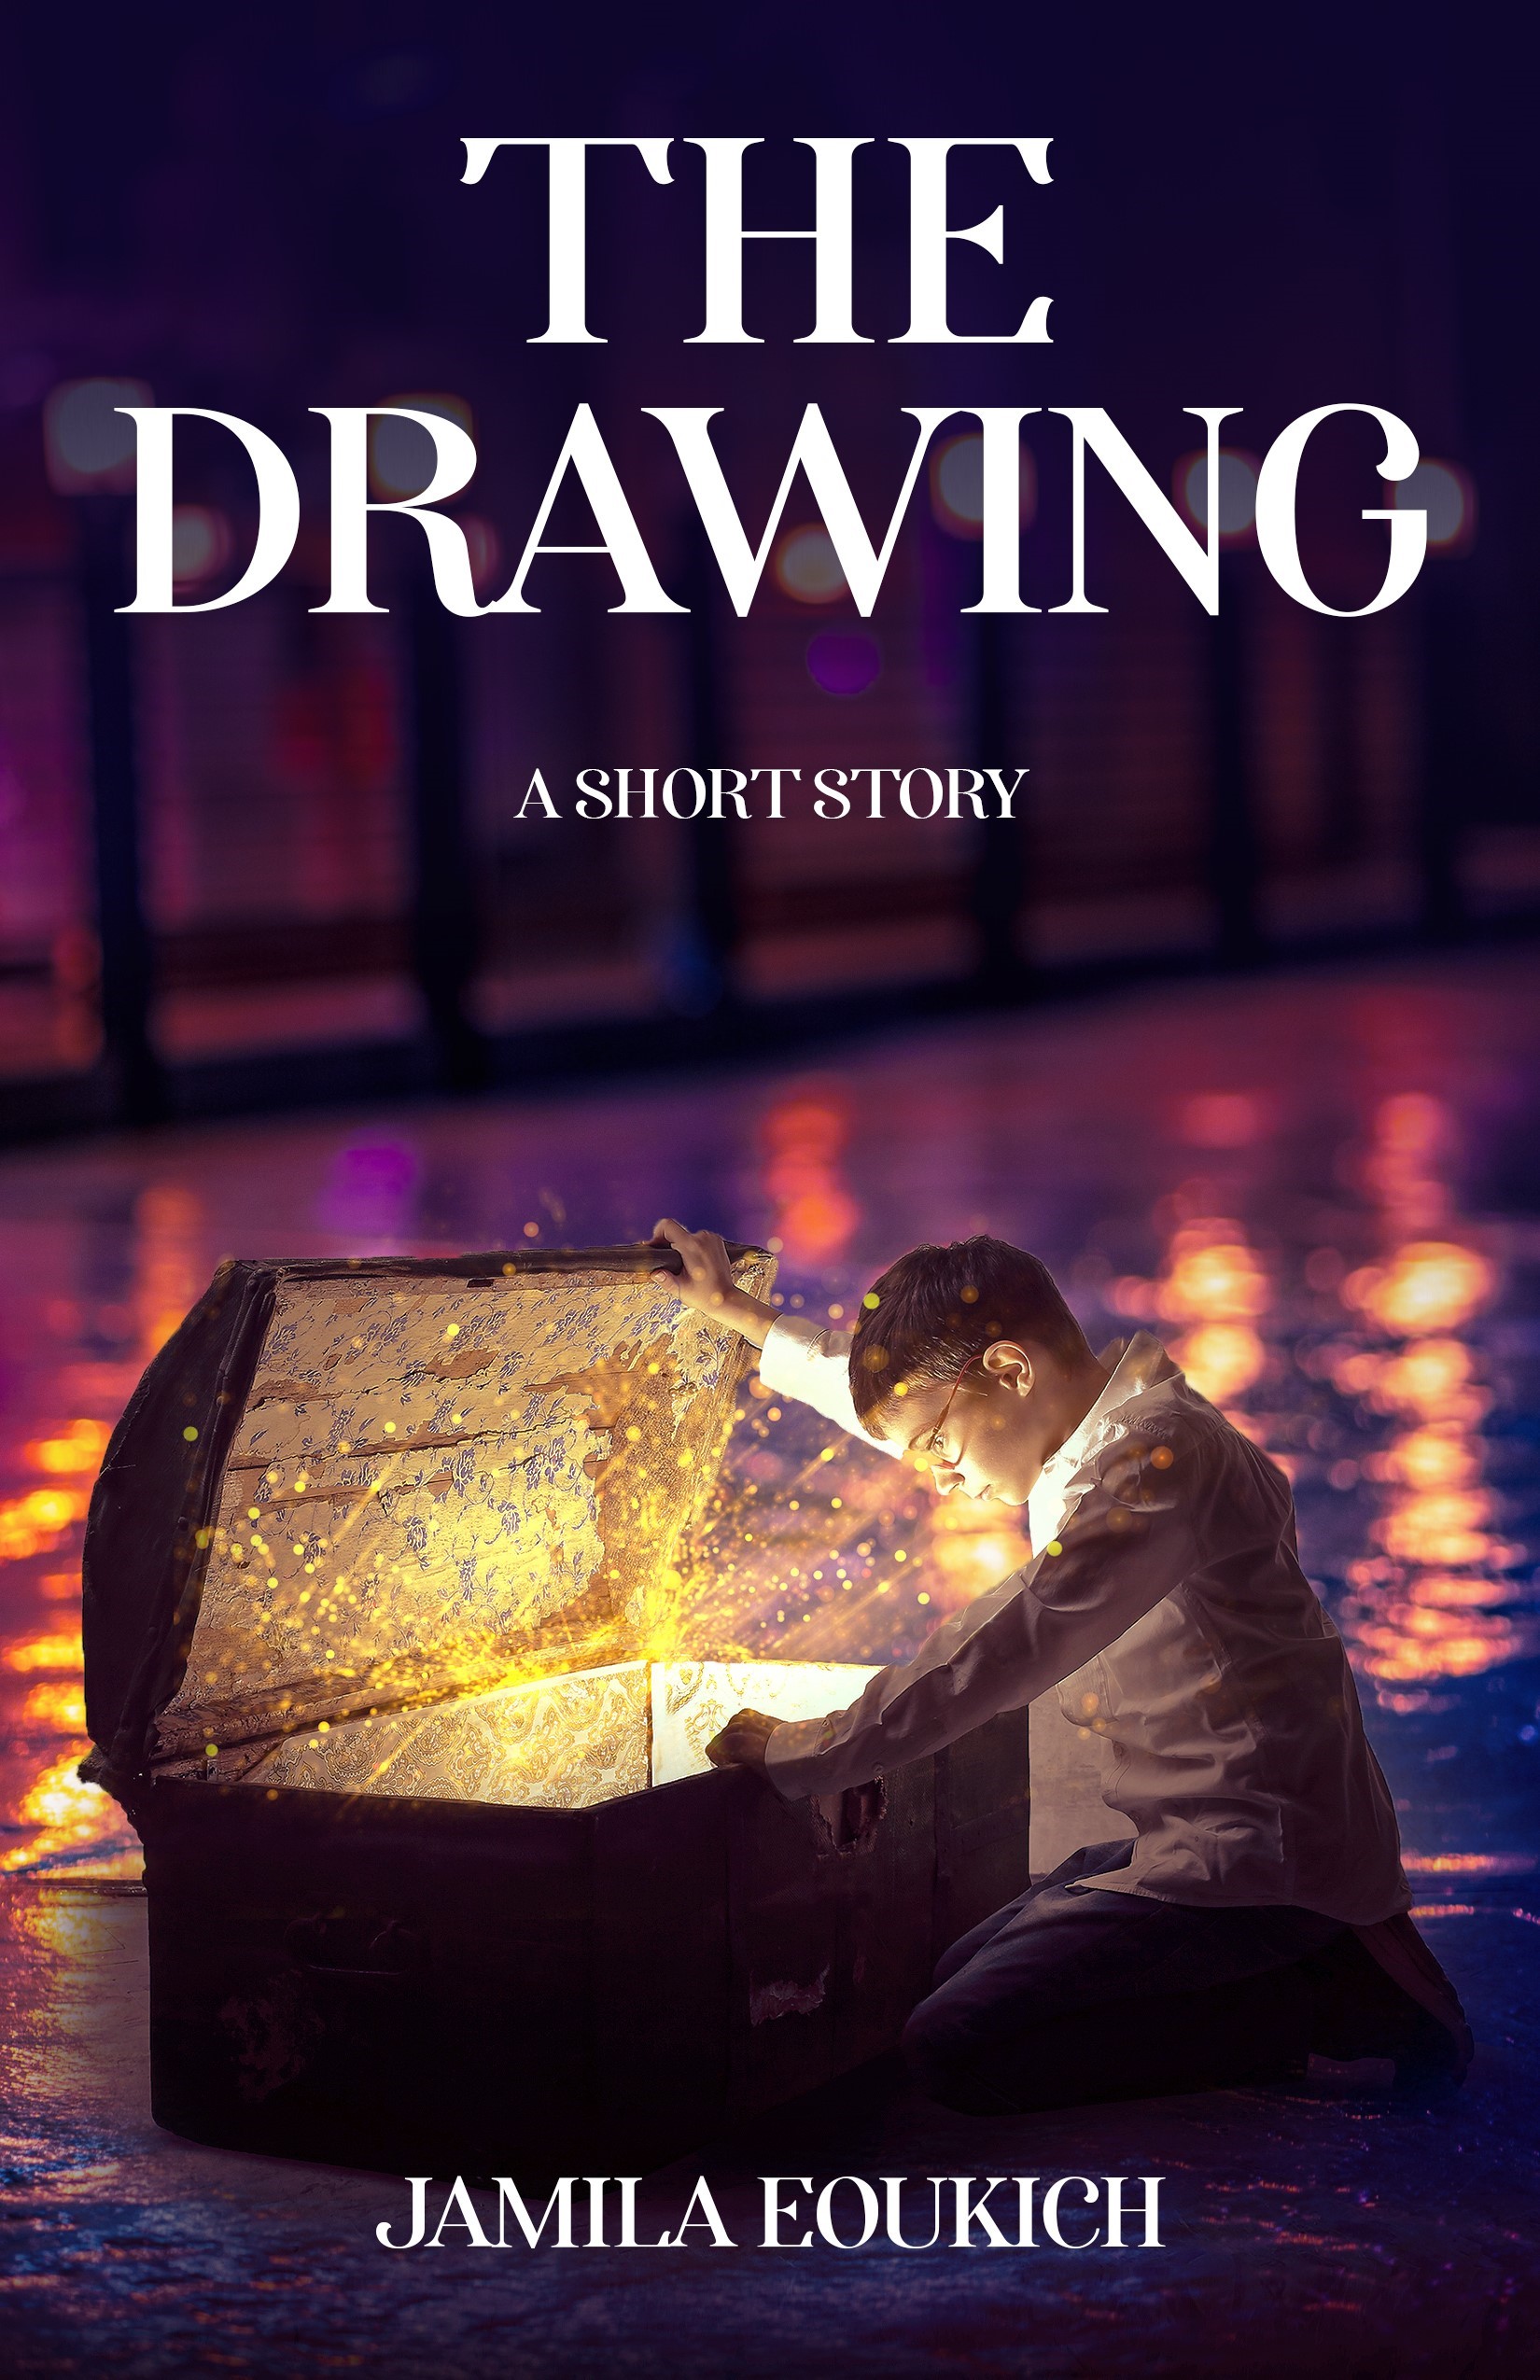 FREE: THE DRAWING: A SHORT STORY by JAMILA EOUKICH